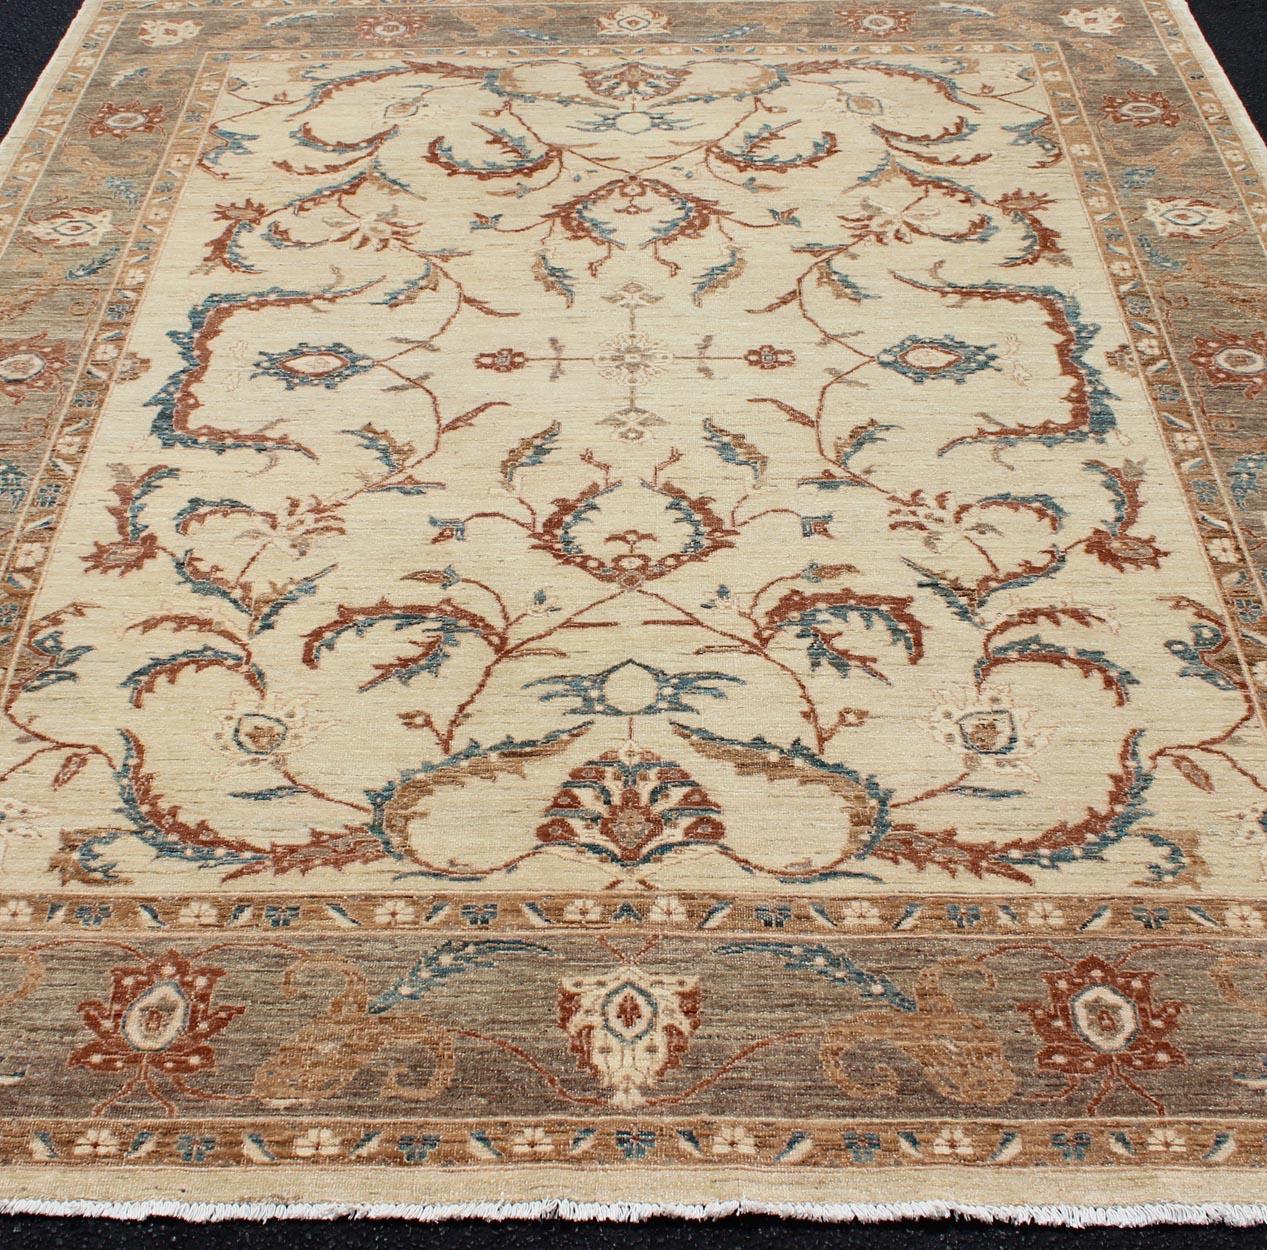 Fine Afghanistan Made Rug in Earthy Tones of Brown, Taupe, Blue, and Coral In Good Condition For Sale In Atlanta, GA